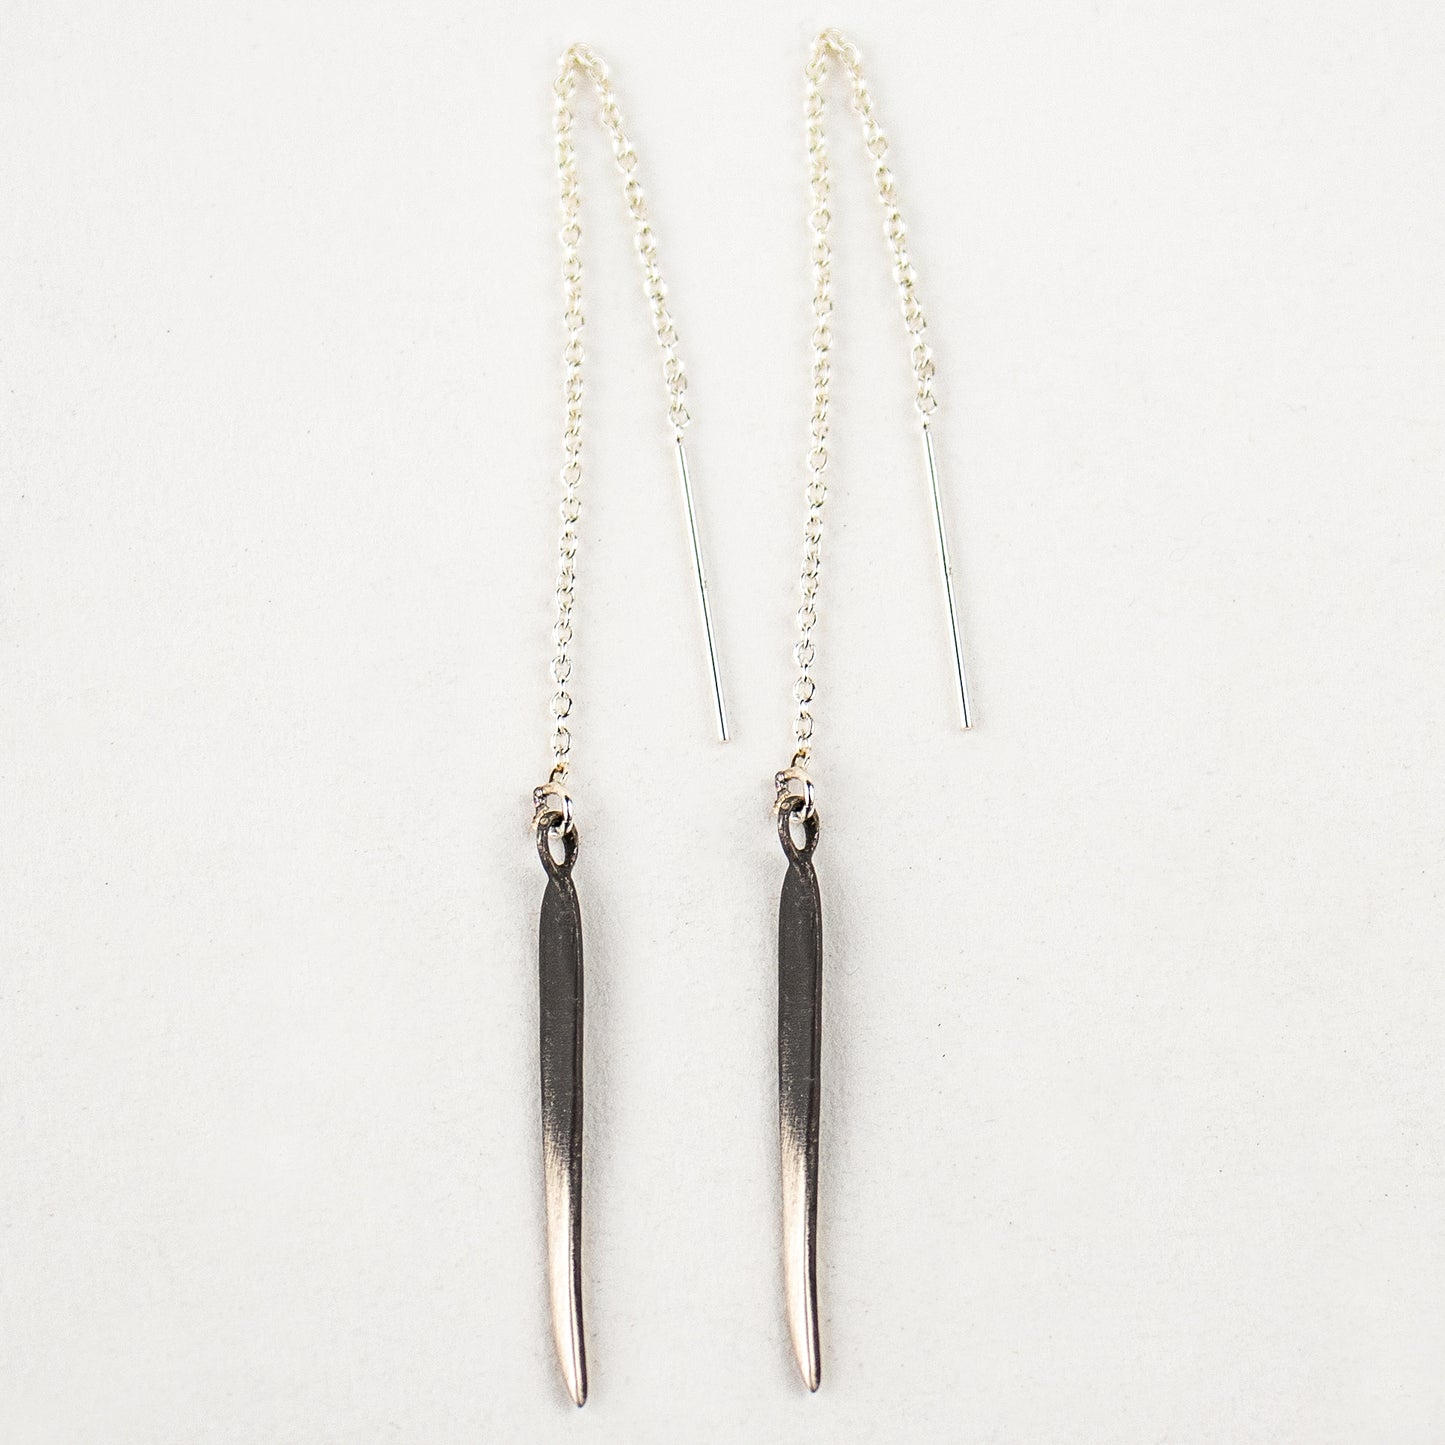 Solid reclaimed sterling silver spike measuring 1 inch and partially oxidized on sterling fine chain handmade and finished in our Catskills store-studio and available as singles to mix-and-match.